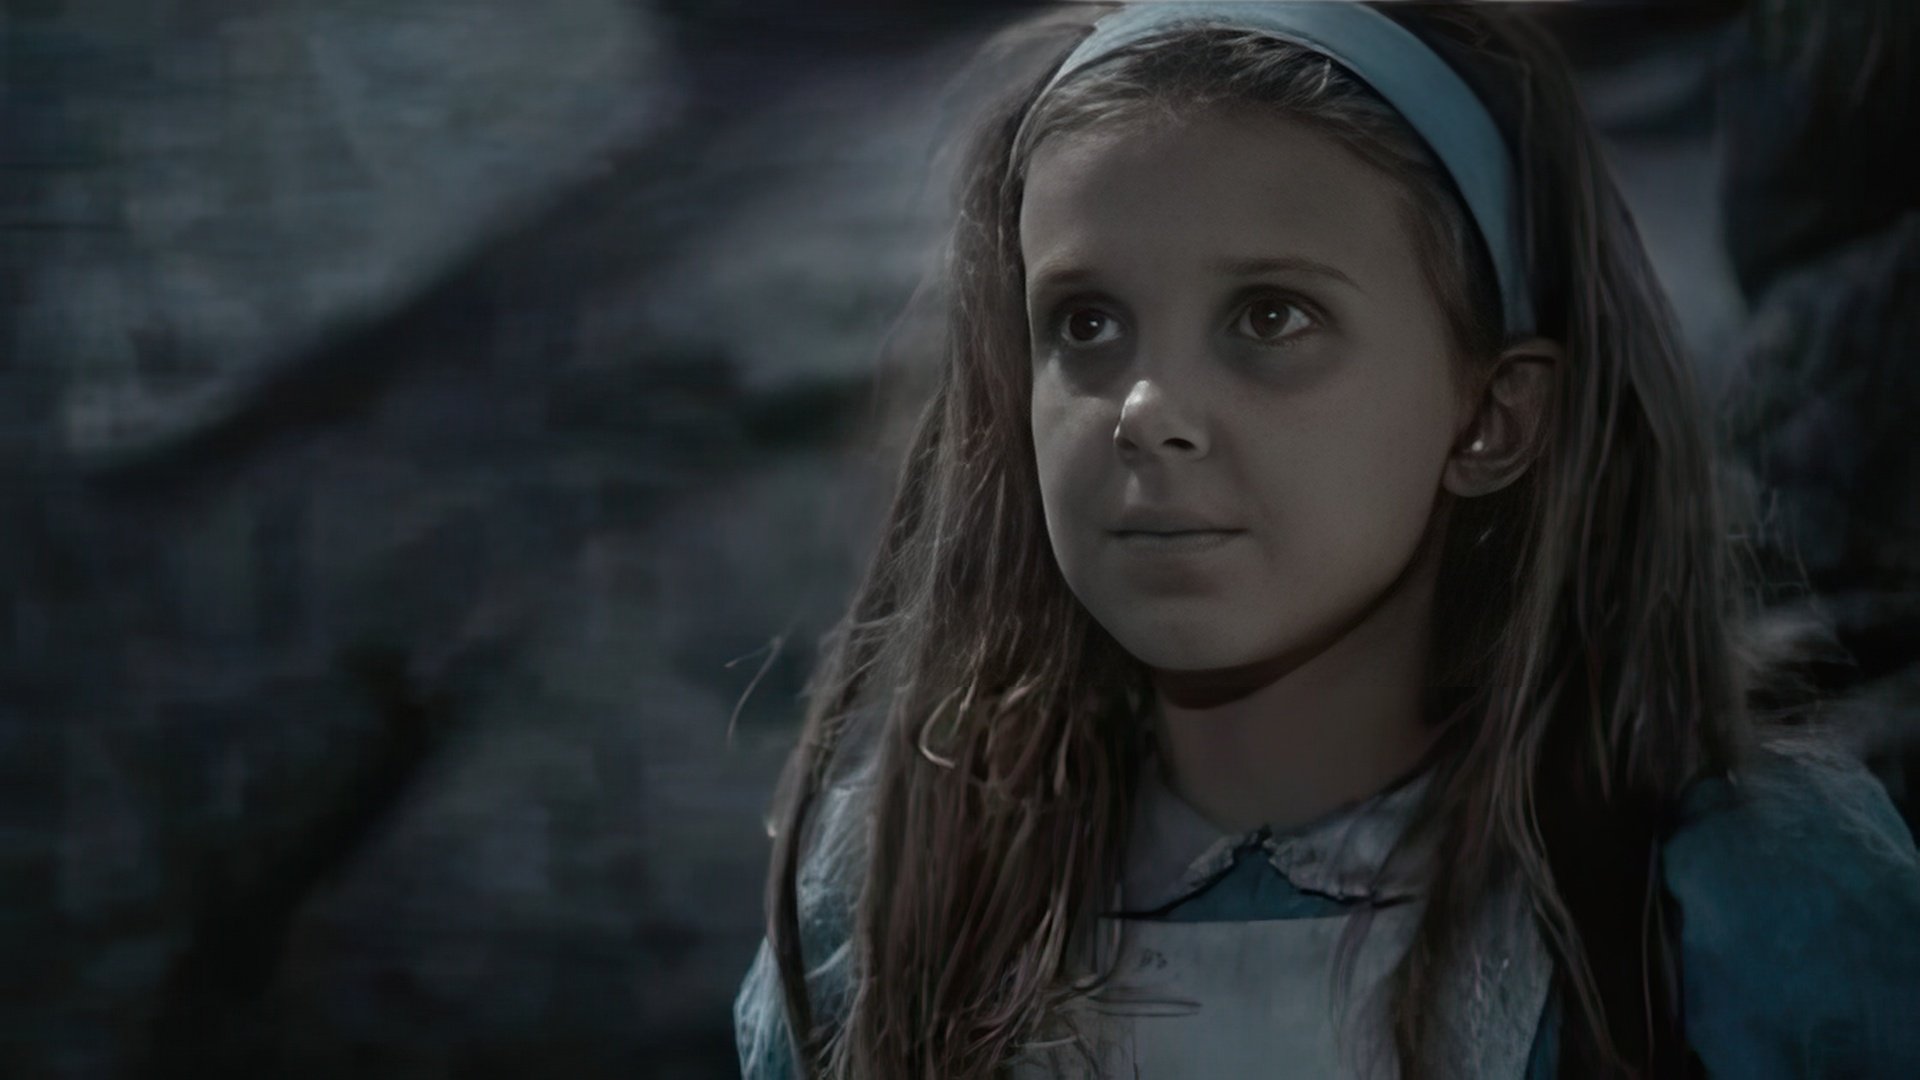 Millie Bobby Brown's first role (Once Upon a Time in Wonderland)